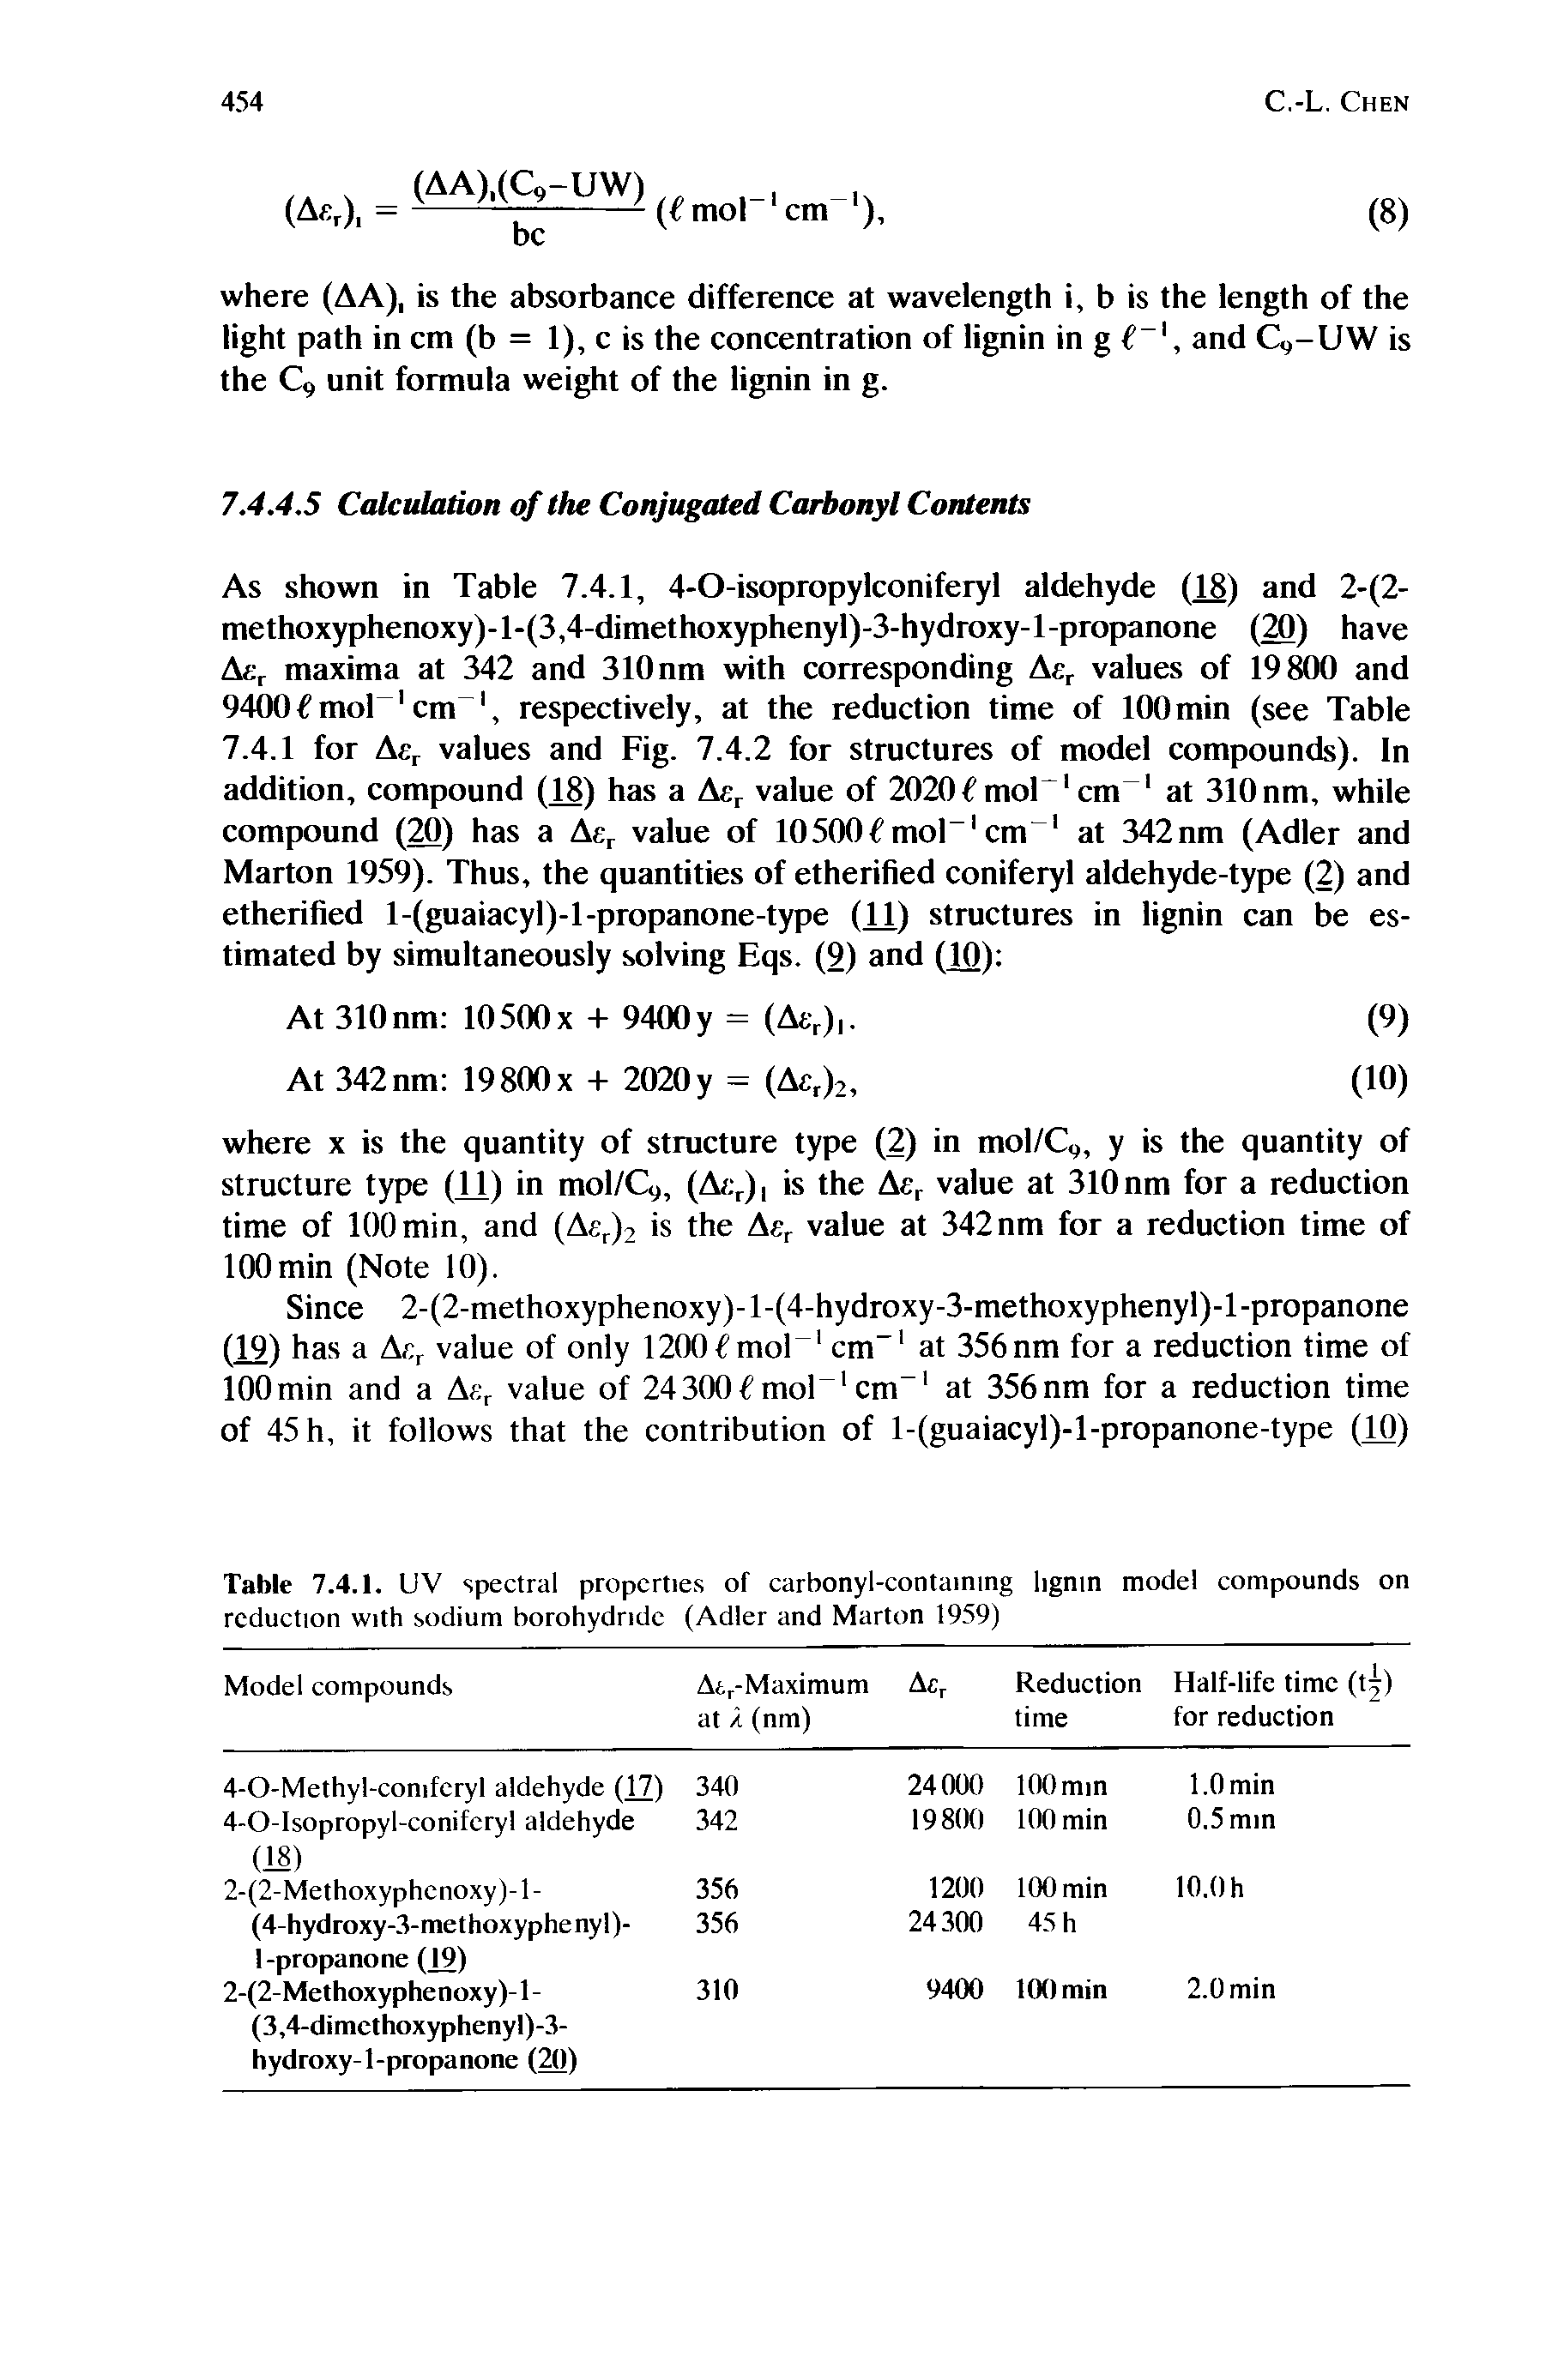 Table 7.4.1. UV spectral properties of carbonyl-containing lignin model compounds on reduction with sodium borohydridc (Adler and Marton 1959)...